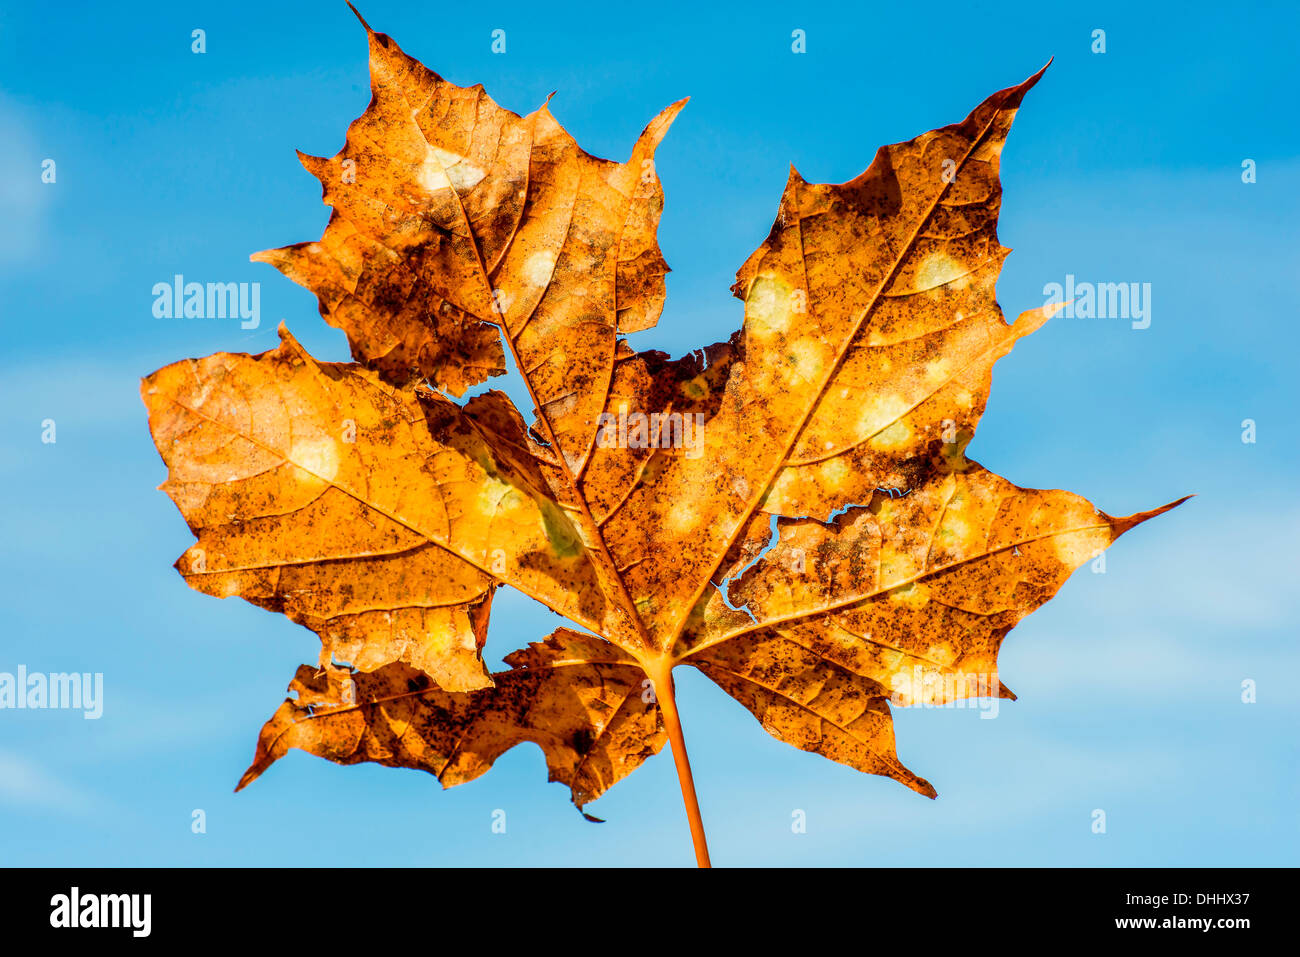 old maple leaf with cracks and holes on a blue sky Stock Photo